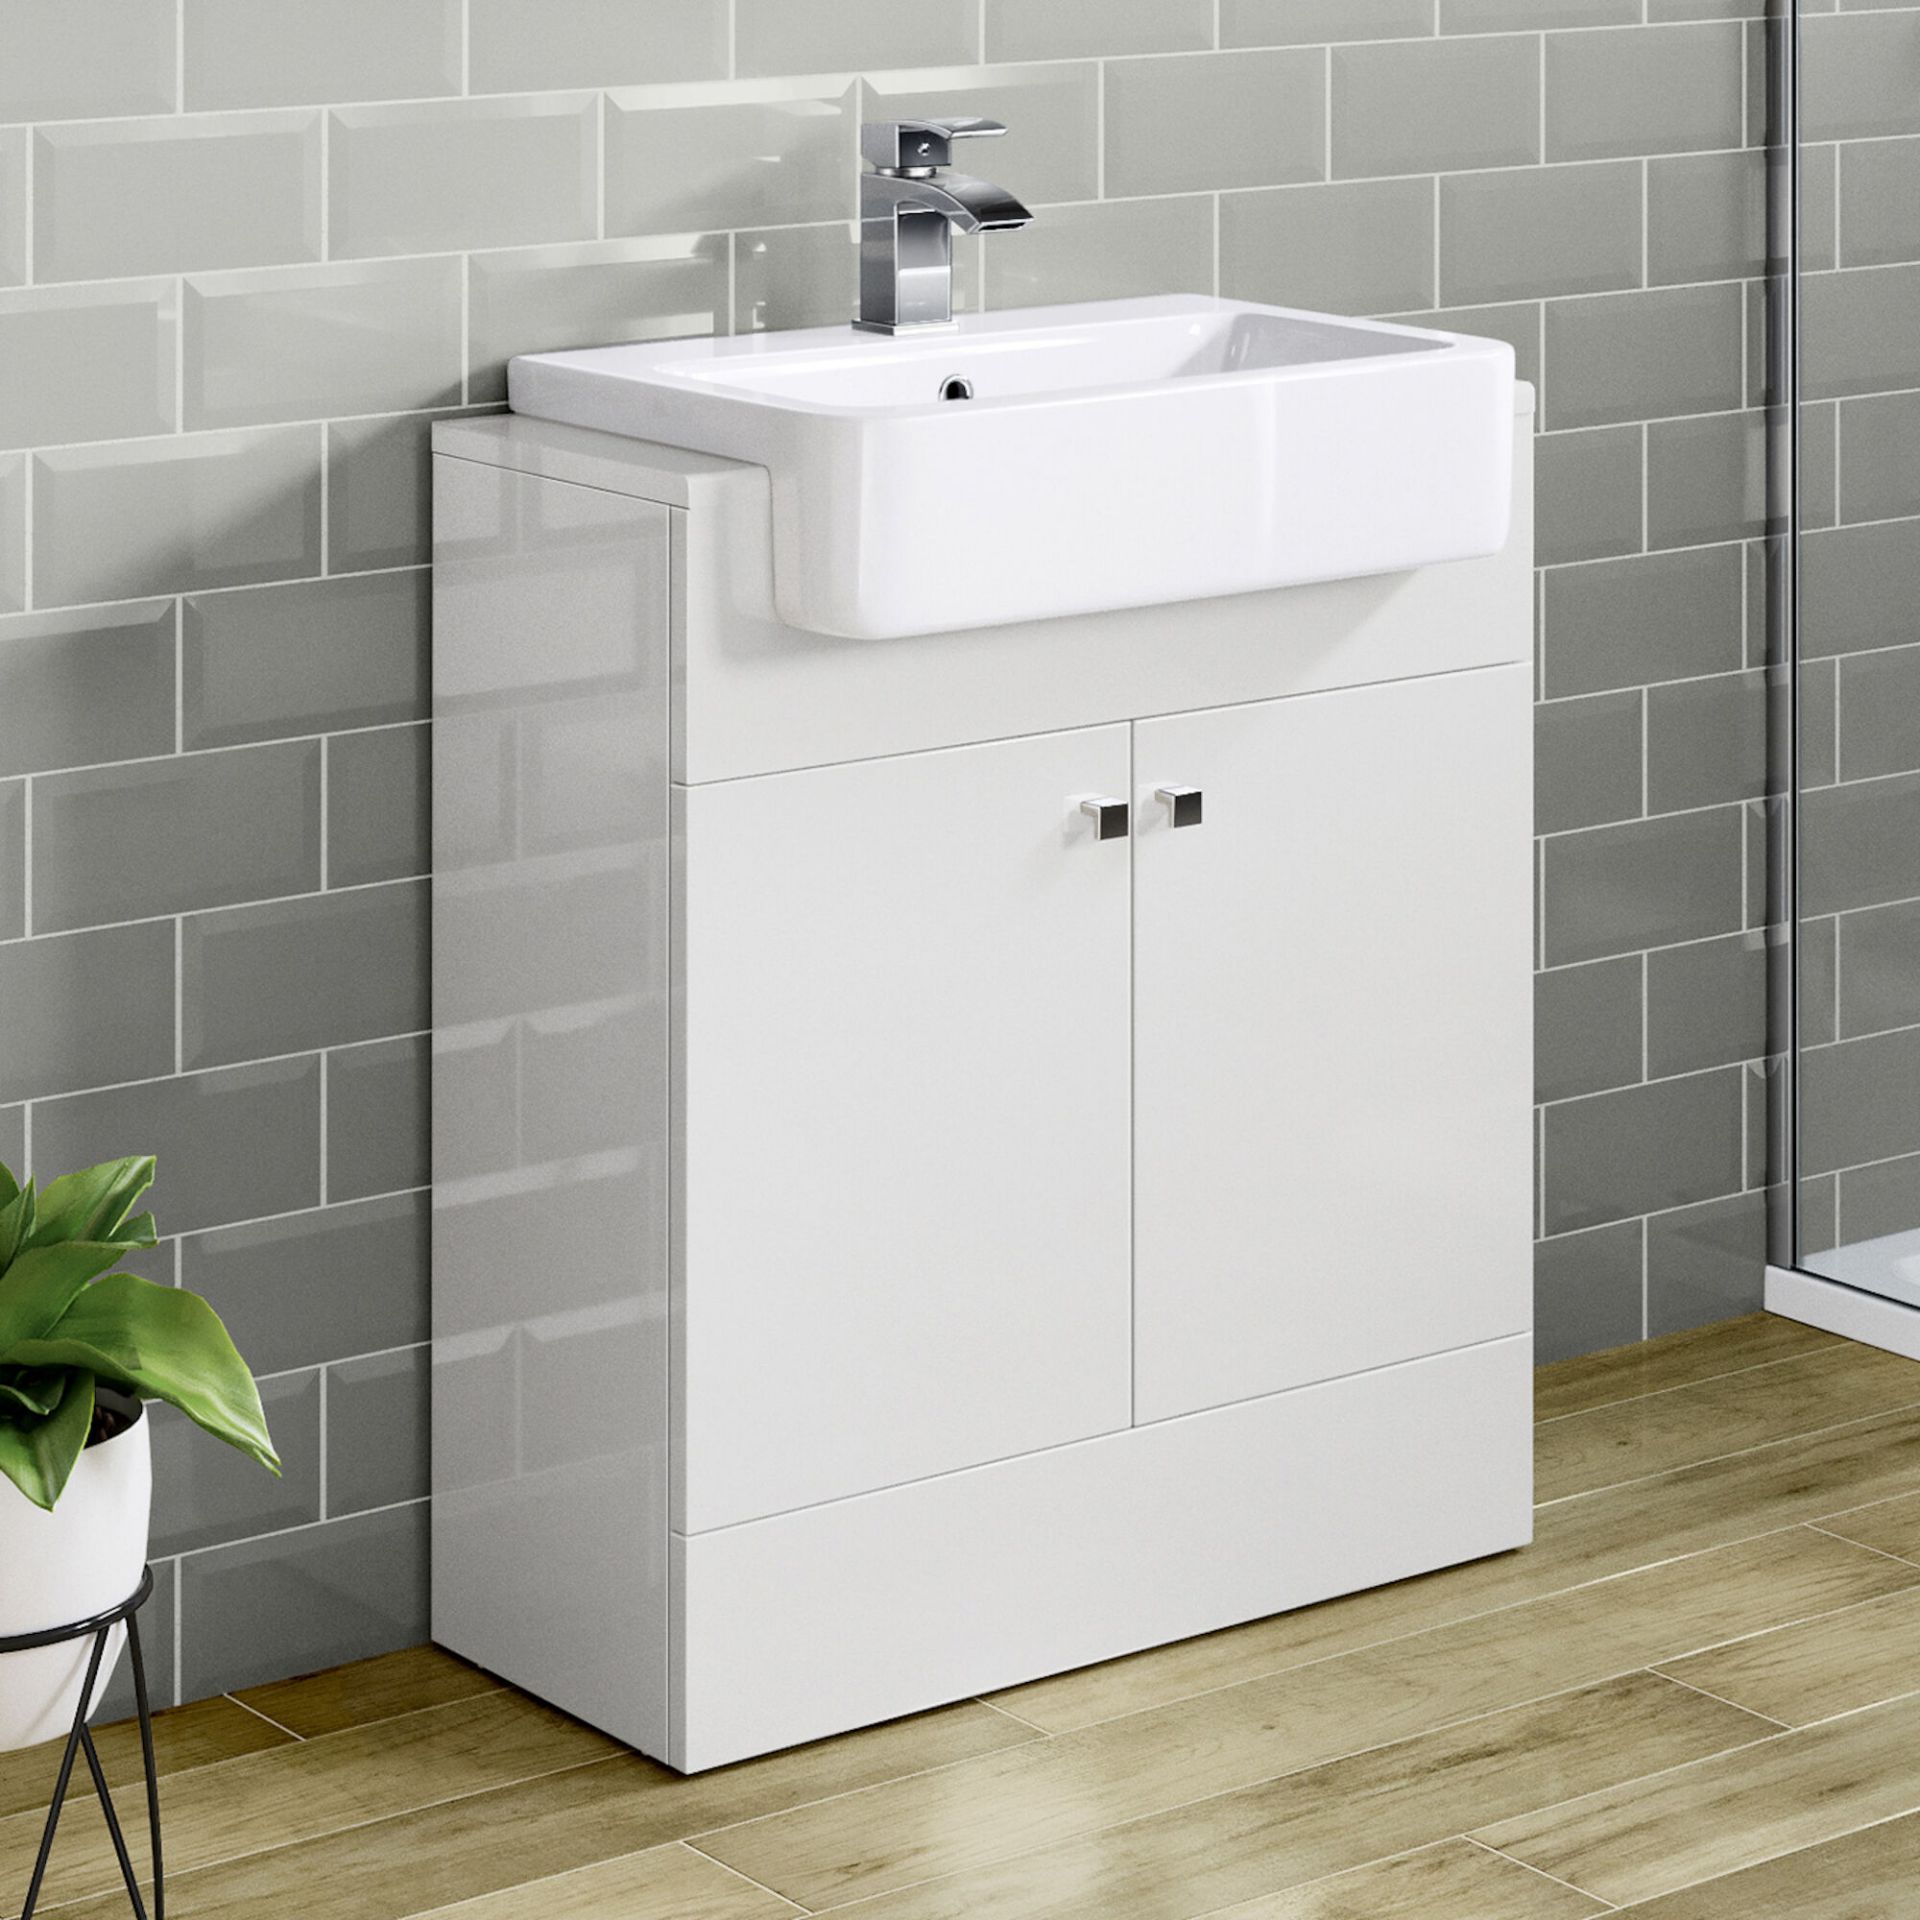 (CE23) 660mm Harper Gloss White Sink Vanity Unit - Floor Standing. RRP £749.99.Comes complete ...